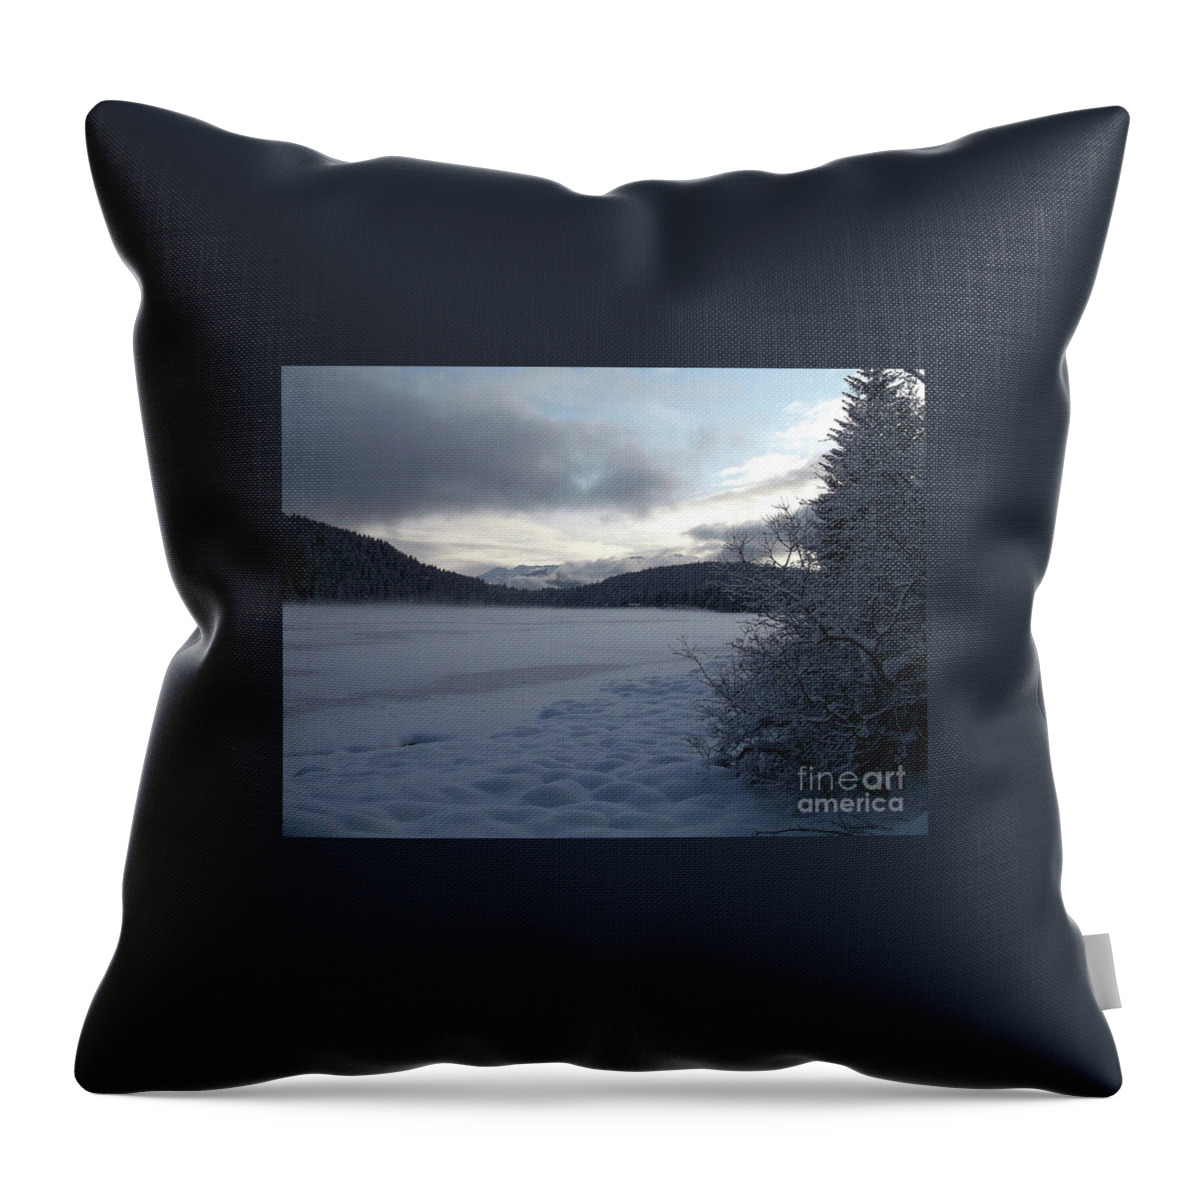 #alaska #juneau #ak #cruise #tours #vacation #peaceful #aukelake #snow #winter #cold #postcard #morning #dawn Throw Pillow featuring the photograph Mist on a frozen lake by Charles Vice